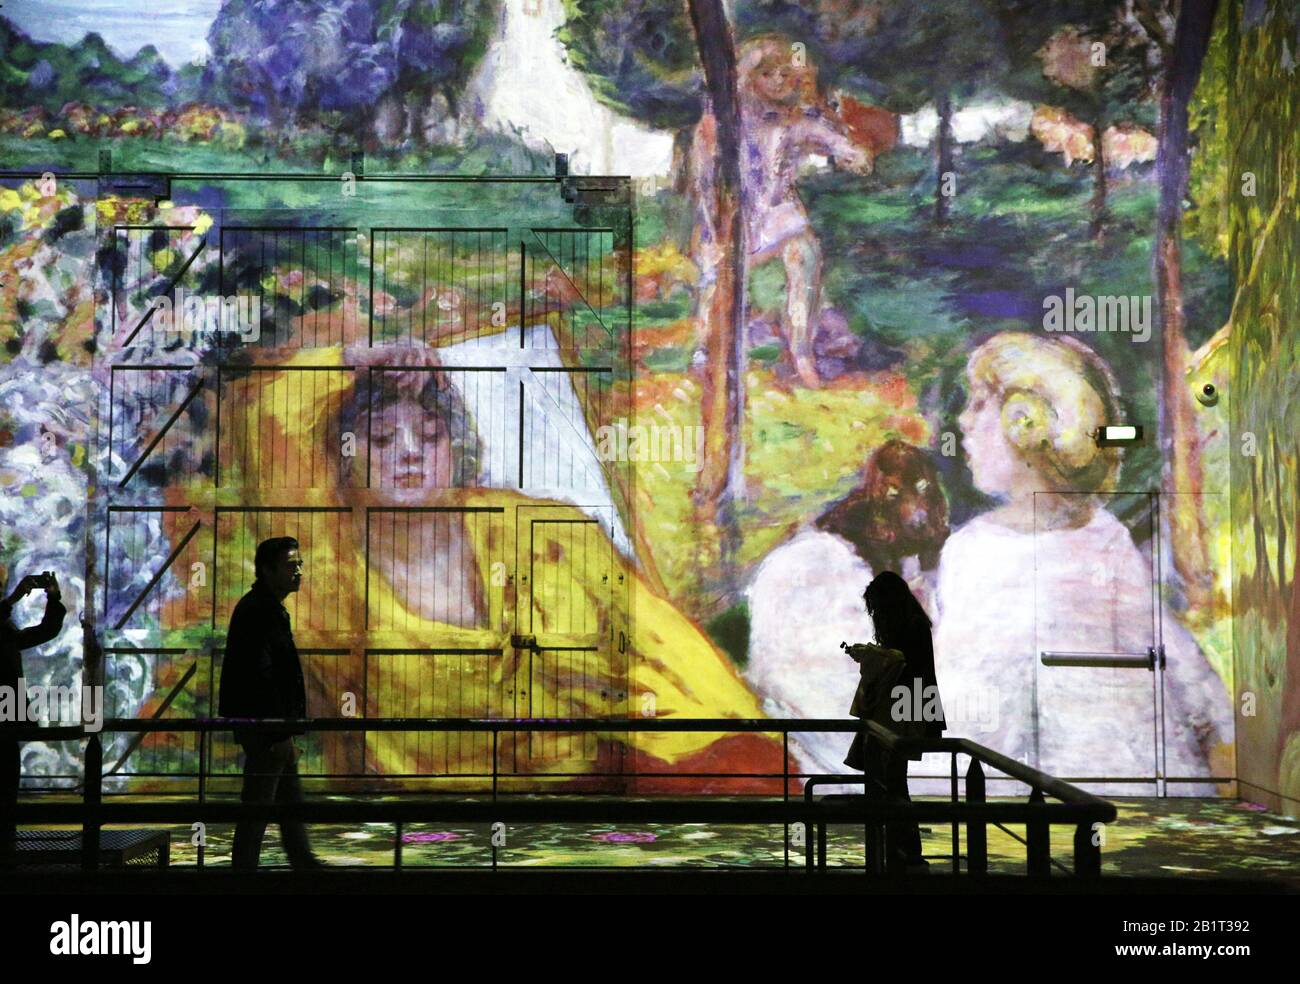 Paris, France. 27th Feb, 2020. People visit the digital exhibition titled 'Monet, Renoir.Chagall: Journeys around the Mediterranean' during a press review in Paris, France, Feb. 27, 2020. The digital exhibition to be held from Feb. 28, 2020 to Jan. 3, 2021 presents visitors with an itinerary that spans the period between Impressionism and modernism. The exhibition immerses visitors in the masterpieces of 20 artists, including Renoir, Monet, Matisse, Chagall, etc., and highlights the link between artistic creativity and the Mediterranean shores. Credit: Gao Jing/Xinhua/Alamy Live News Stock Photo